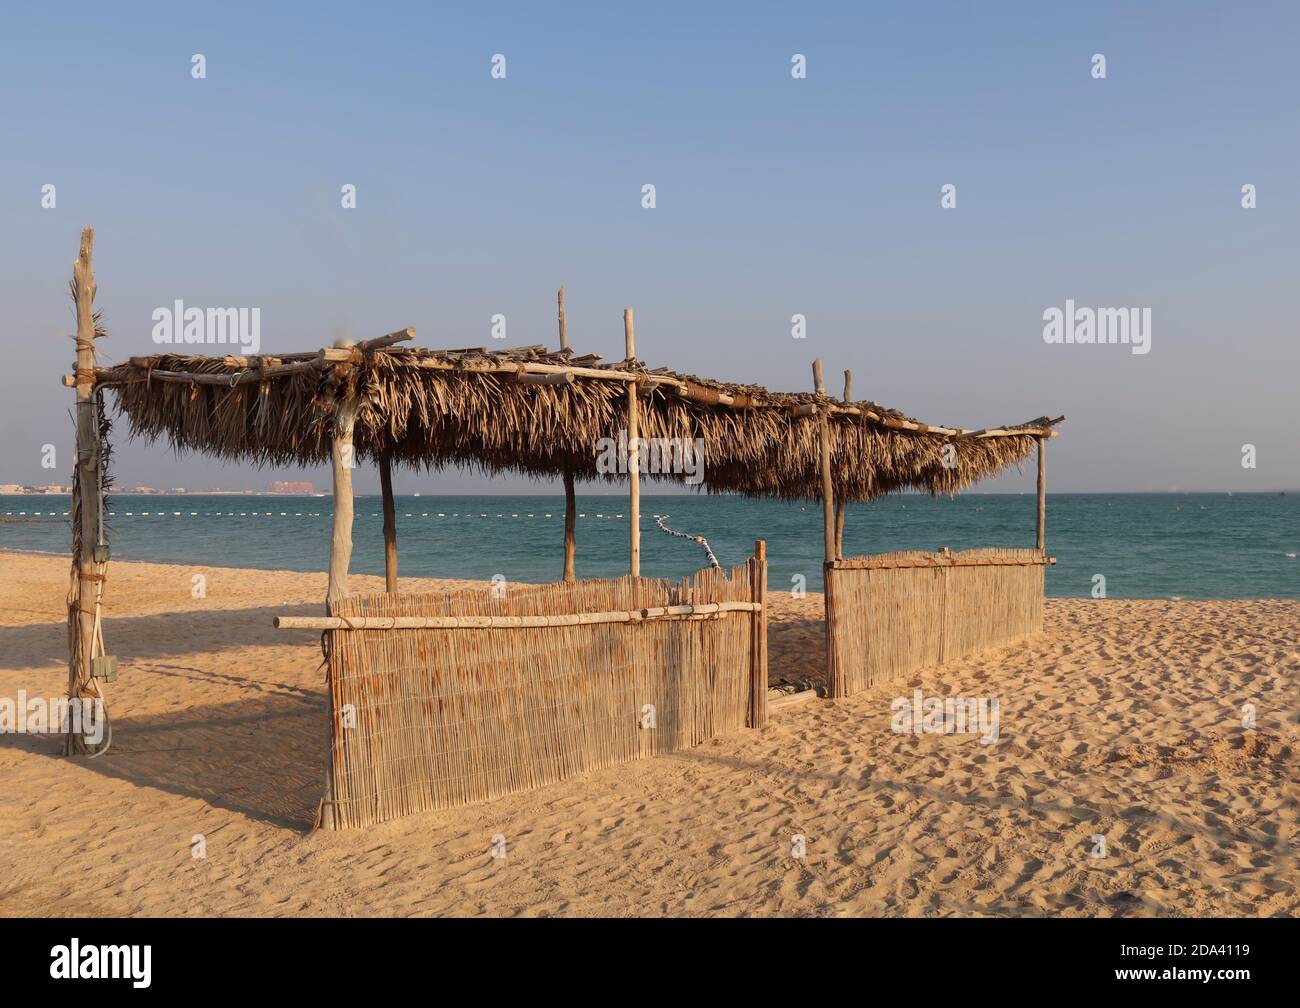 A palm shed on a beach in Doha Qatar. Stock Photo